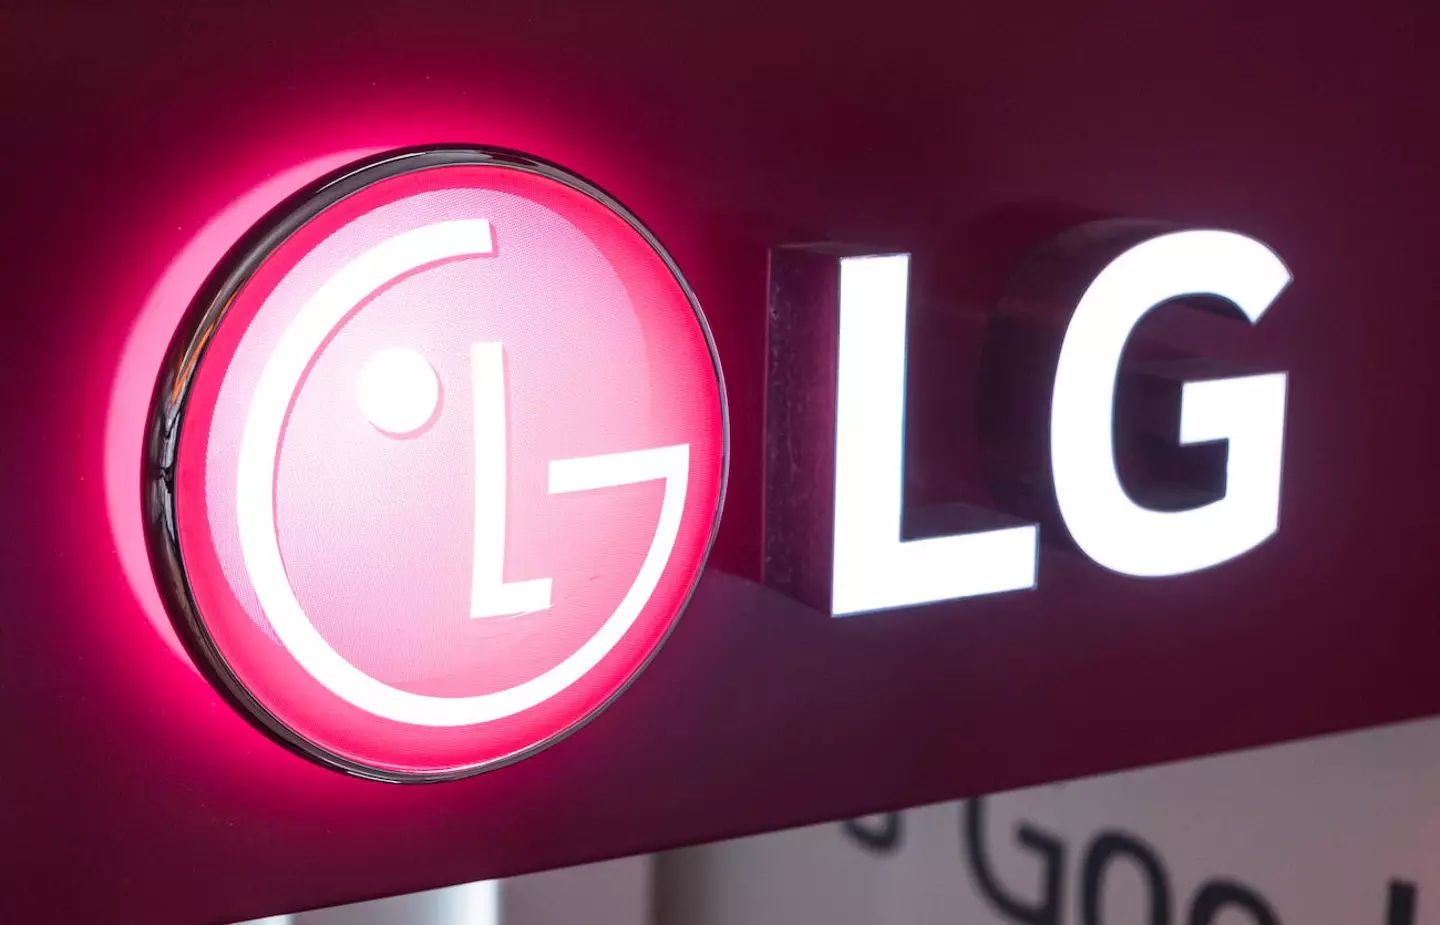 People are just finding out the hidden message behind LG's logo and it's  blowing their minds